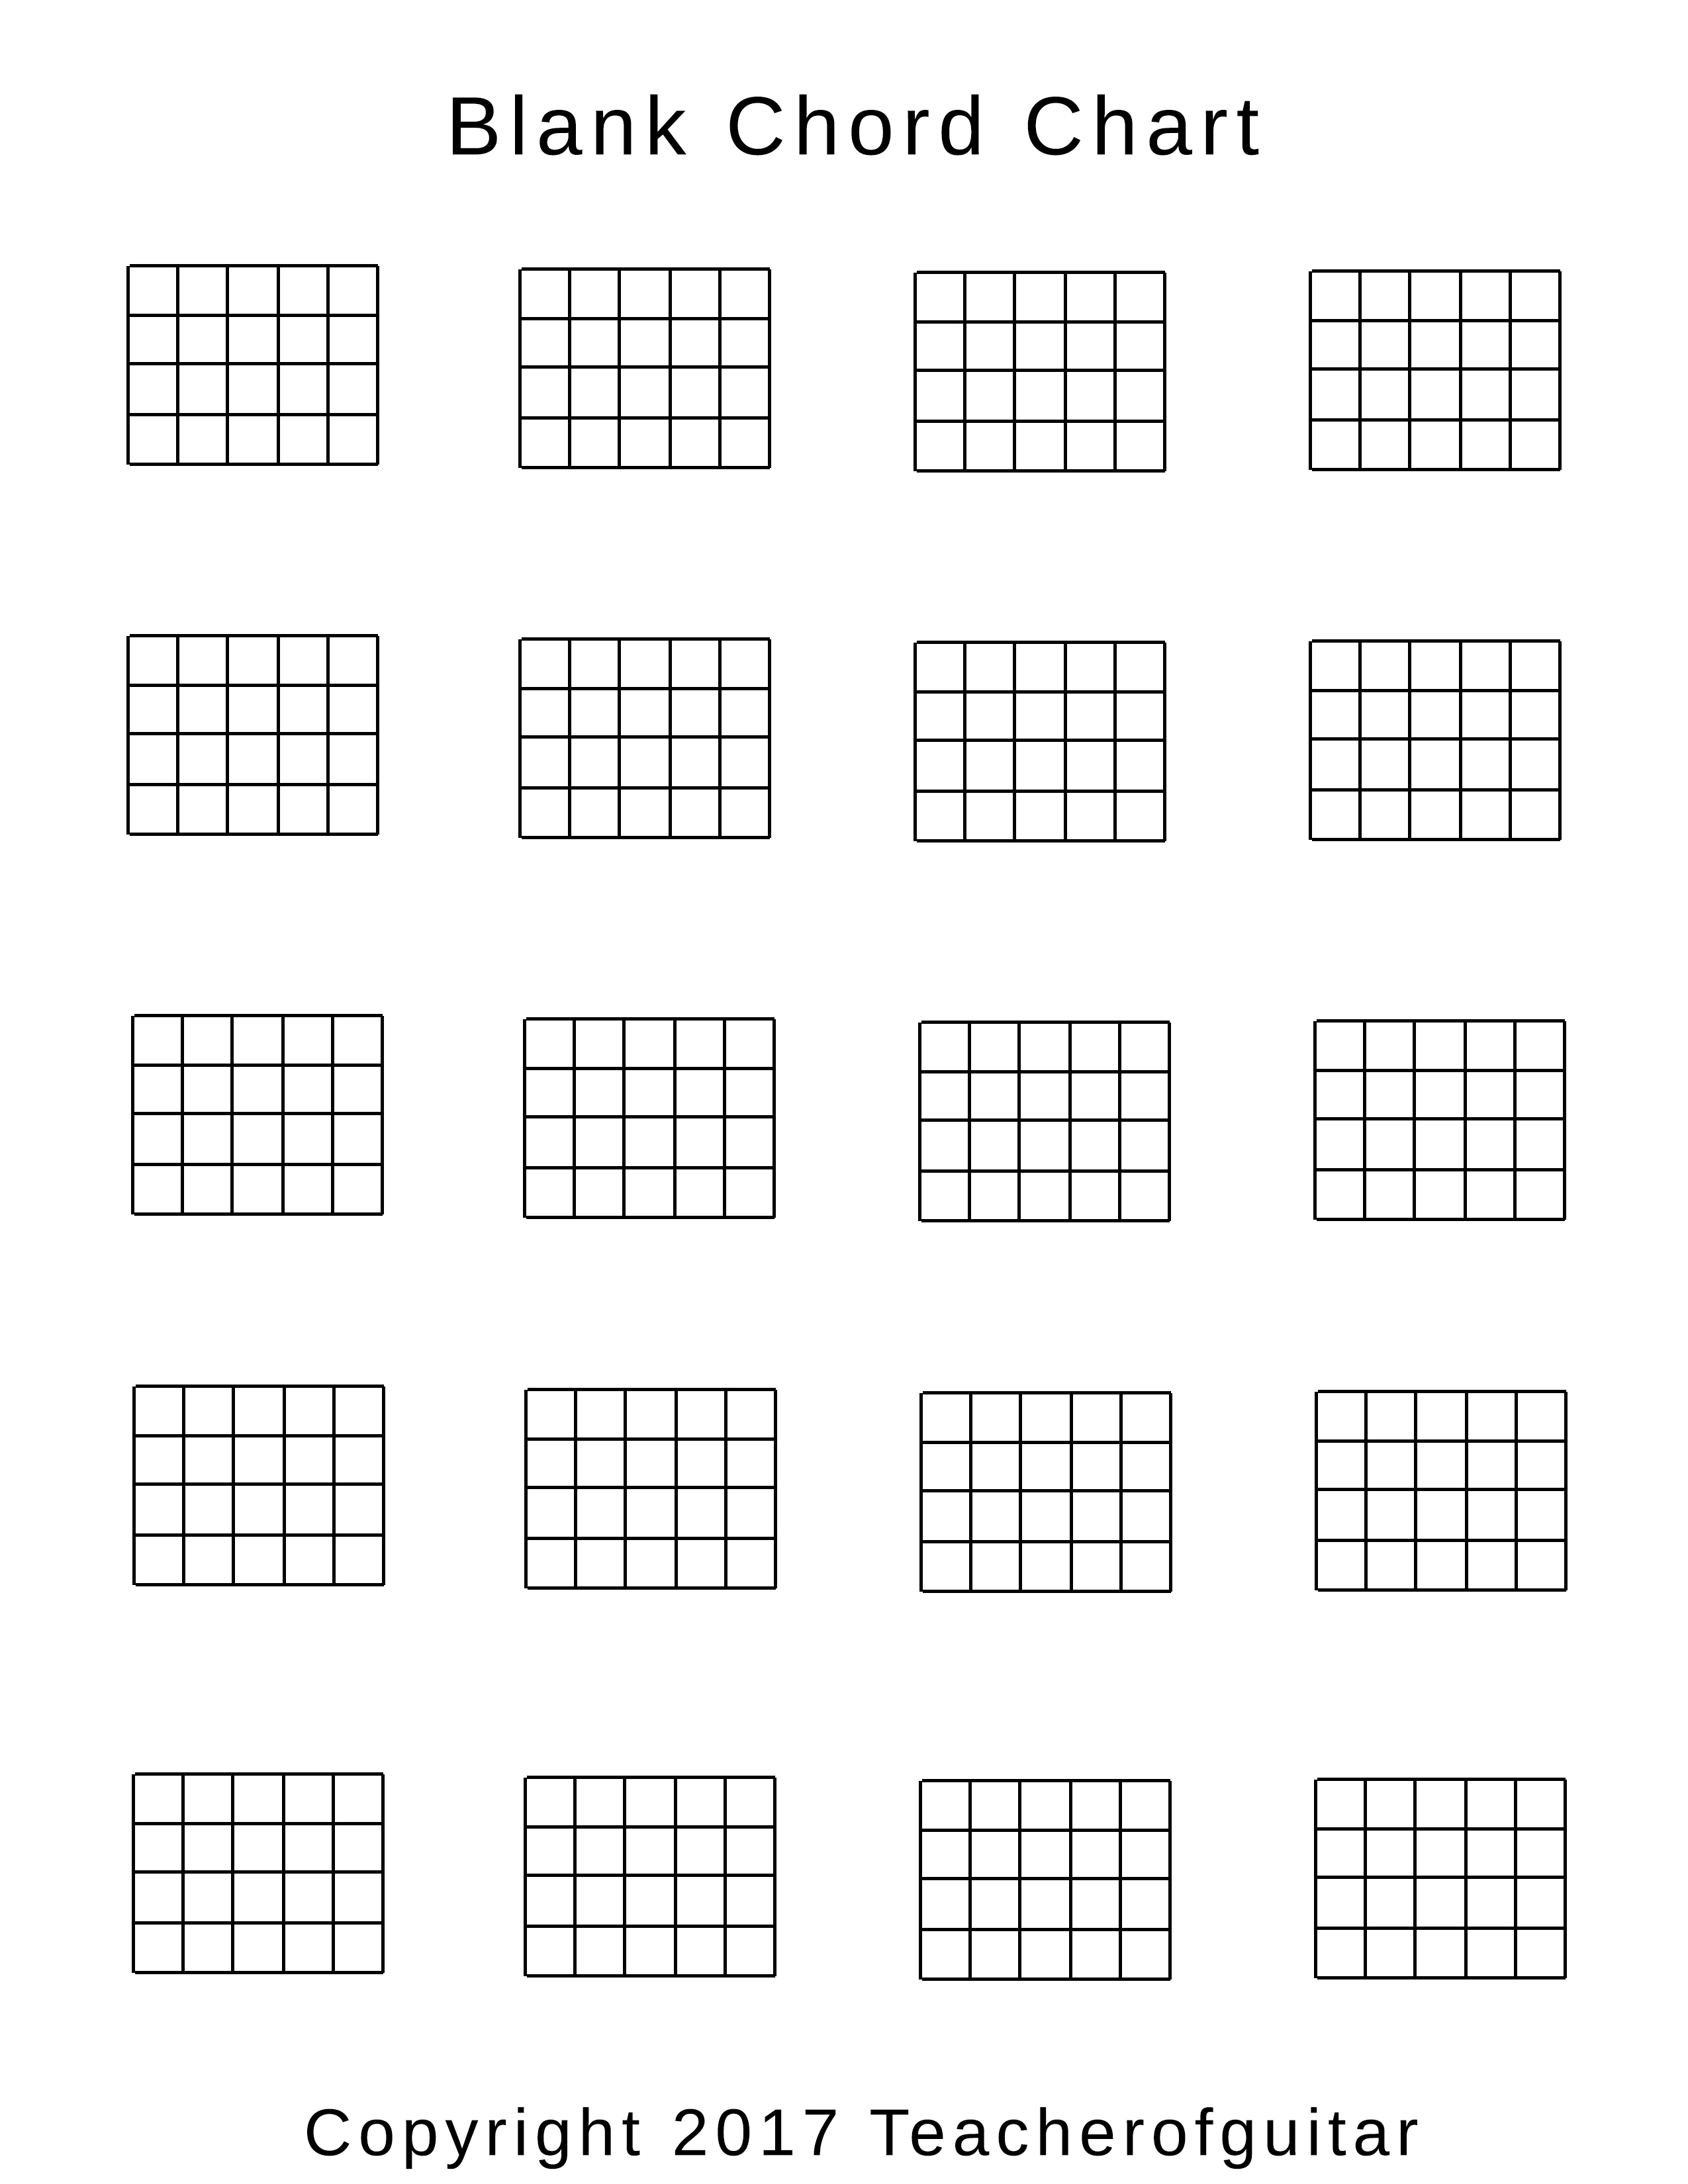 blank-chord-chart-the-power-of-music